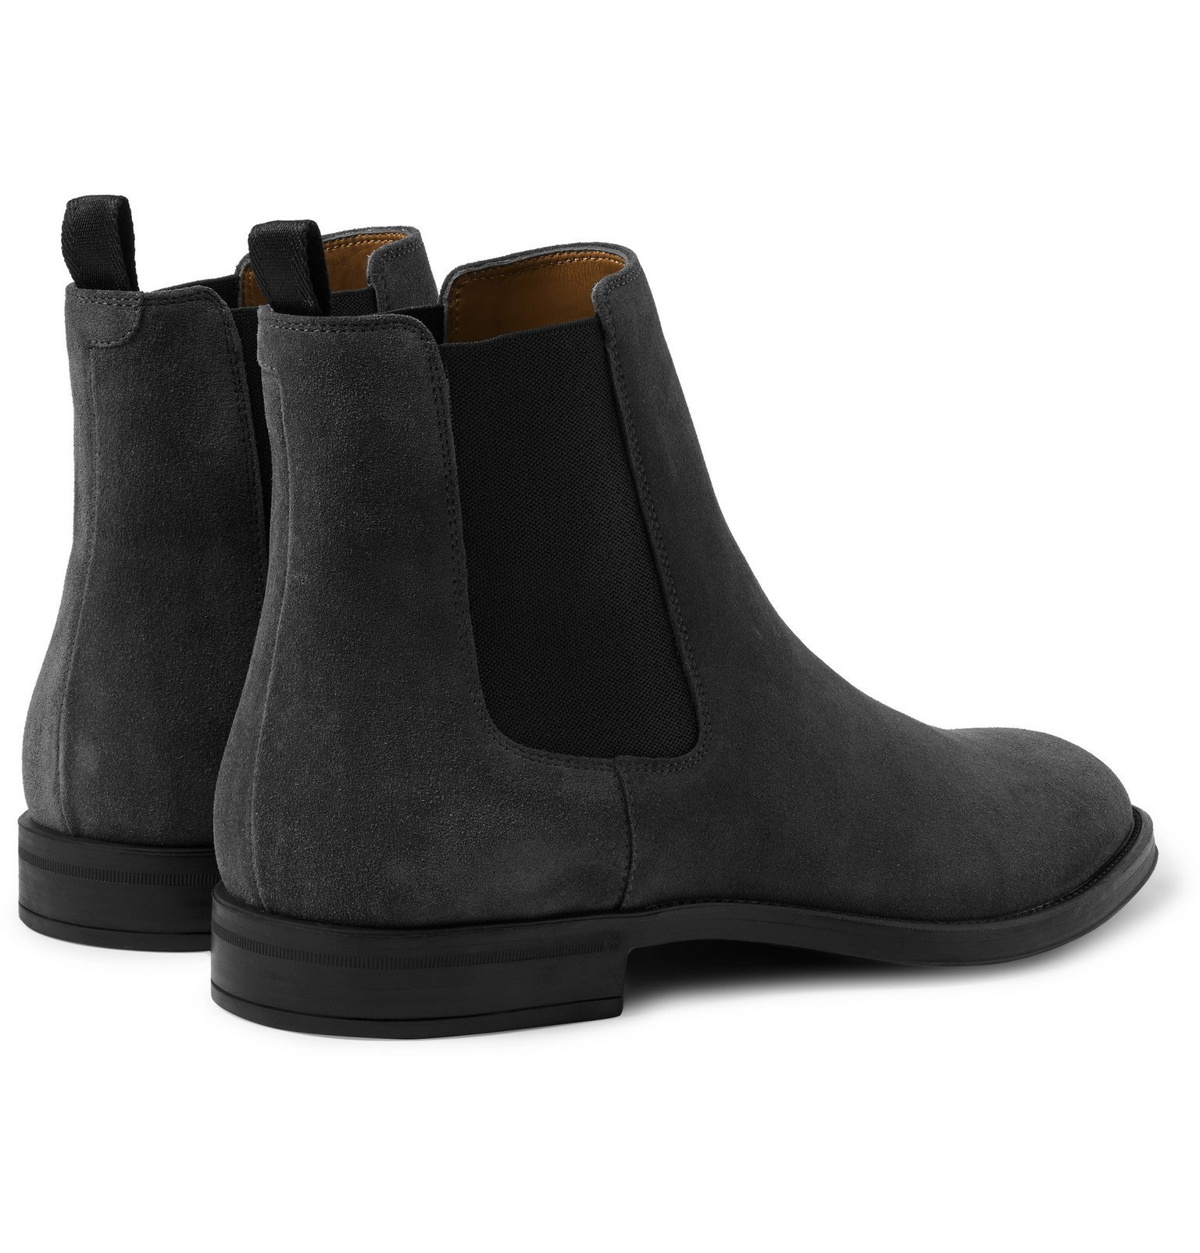 Hugo Boss - Coventry Suede Chelsea Boots - Gray Hugo